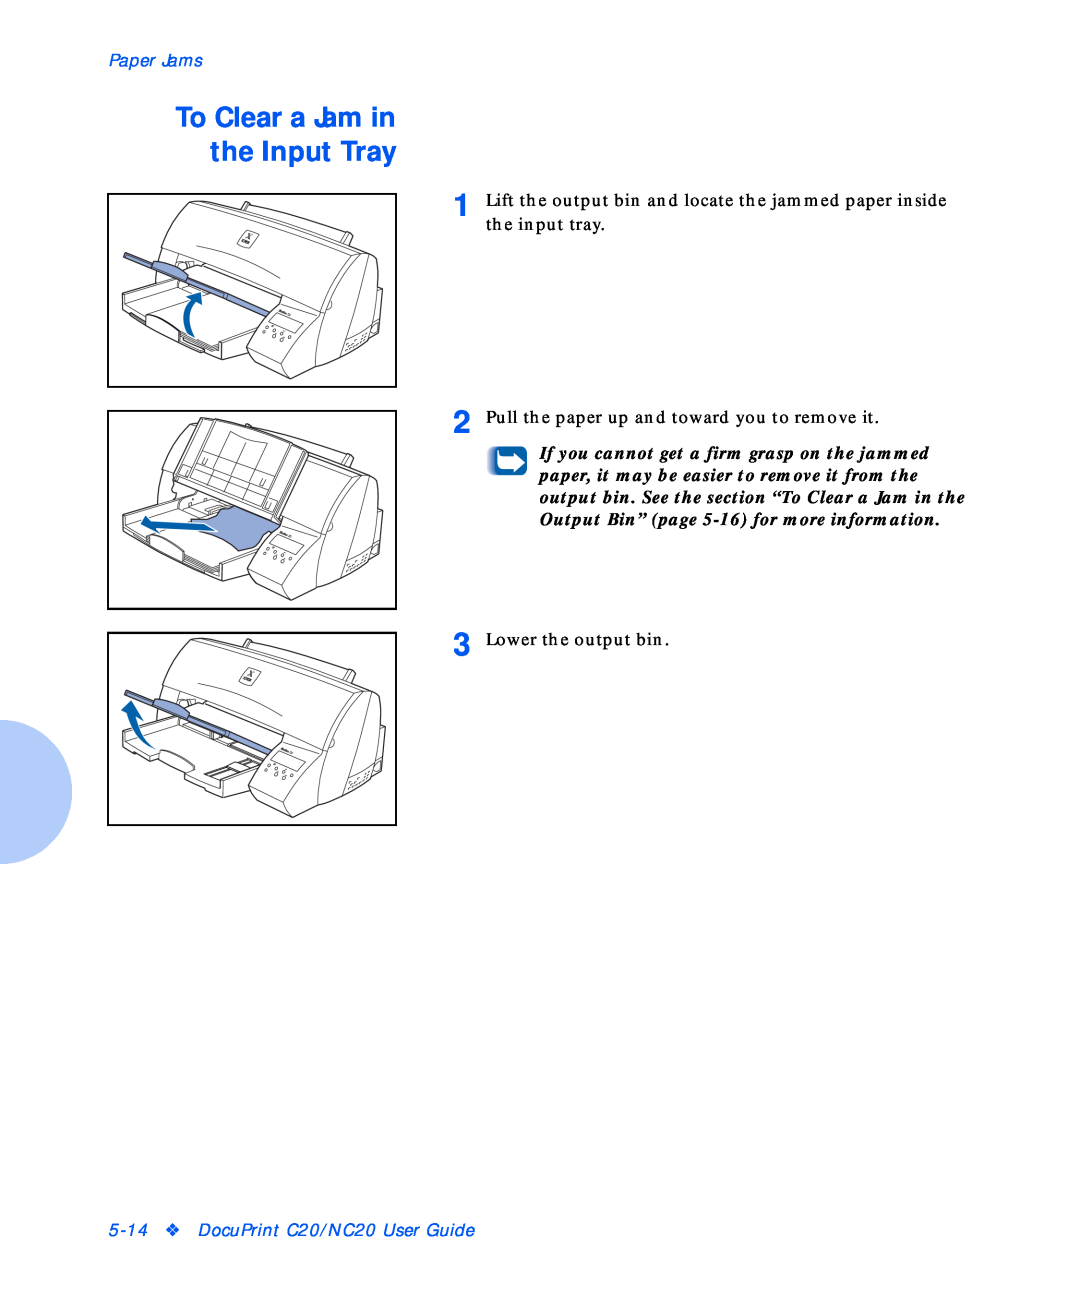 Xerox NC20 manual To Clear a Jam in the Input Tray, Paper Jams, Pull the paper up and toward you to remove it 